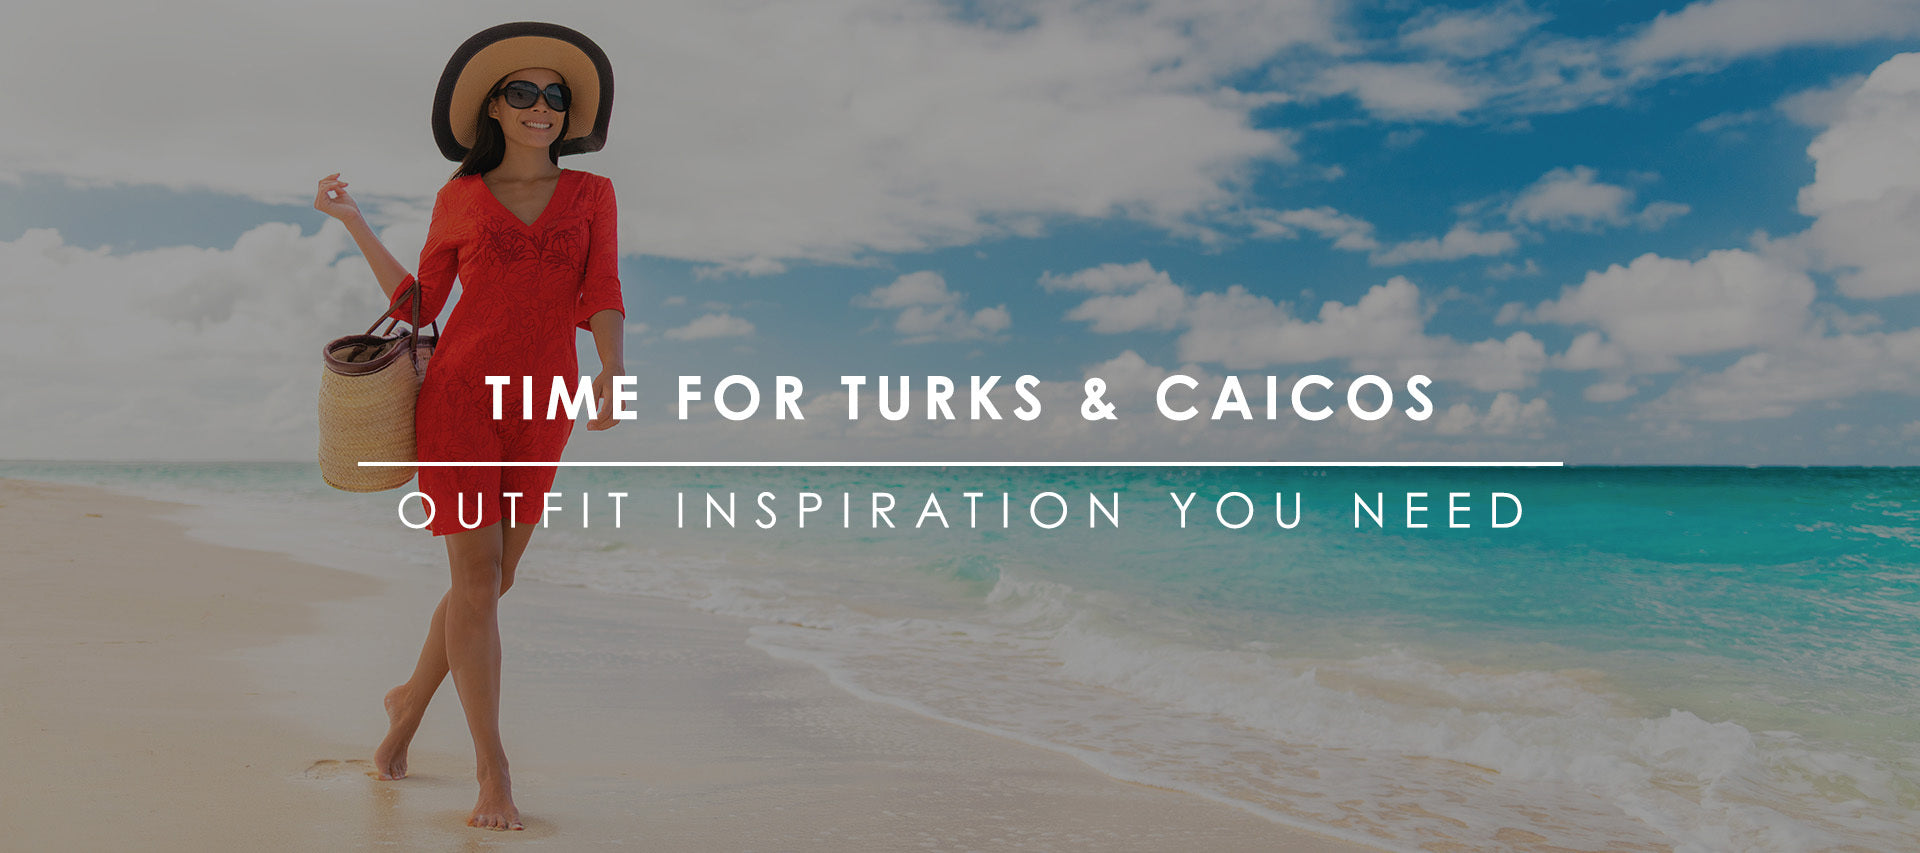 What to Wear in Turks & Caicos